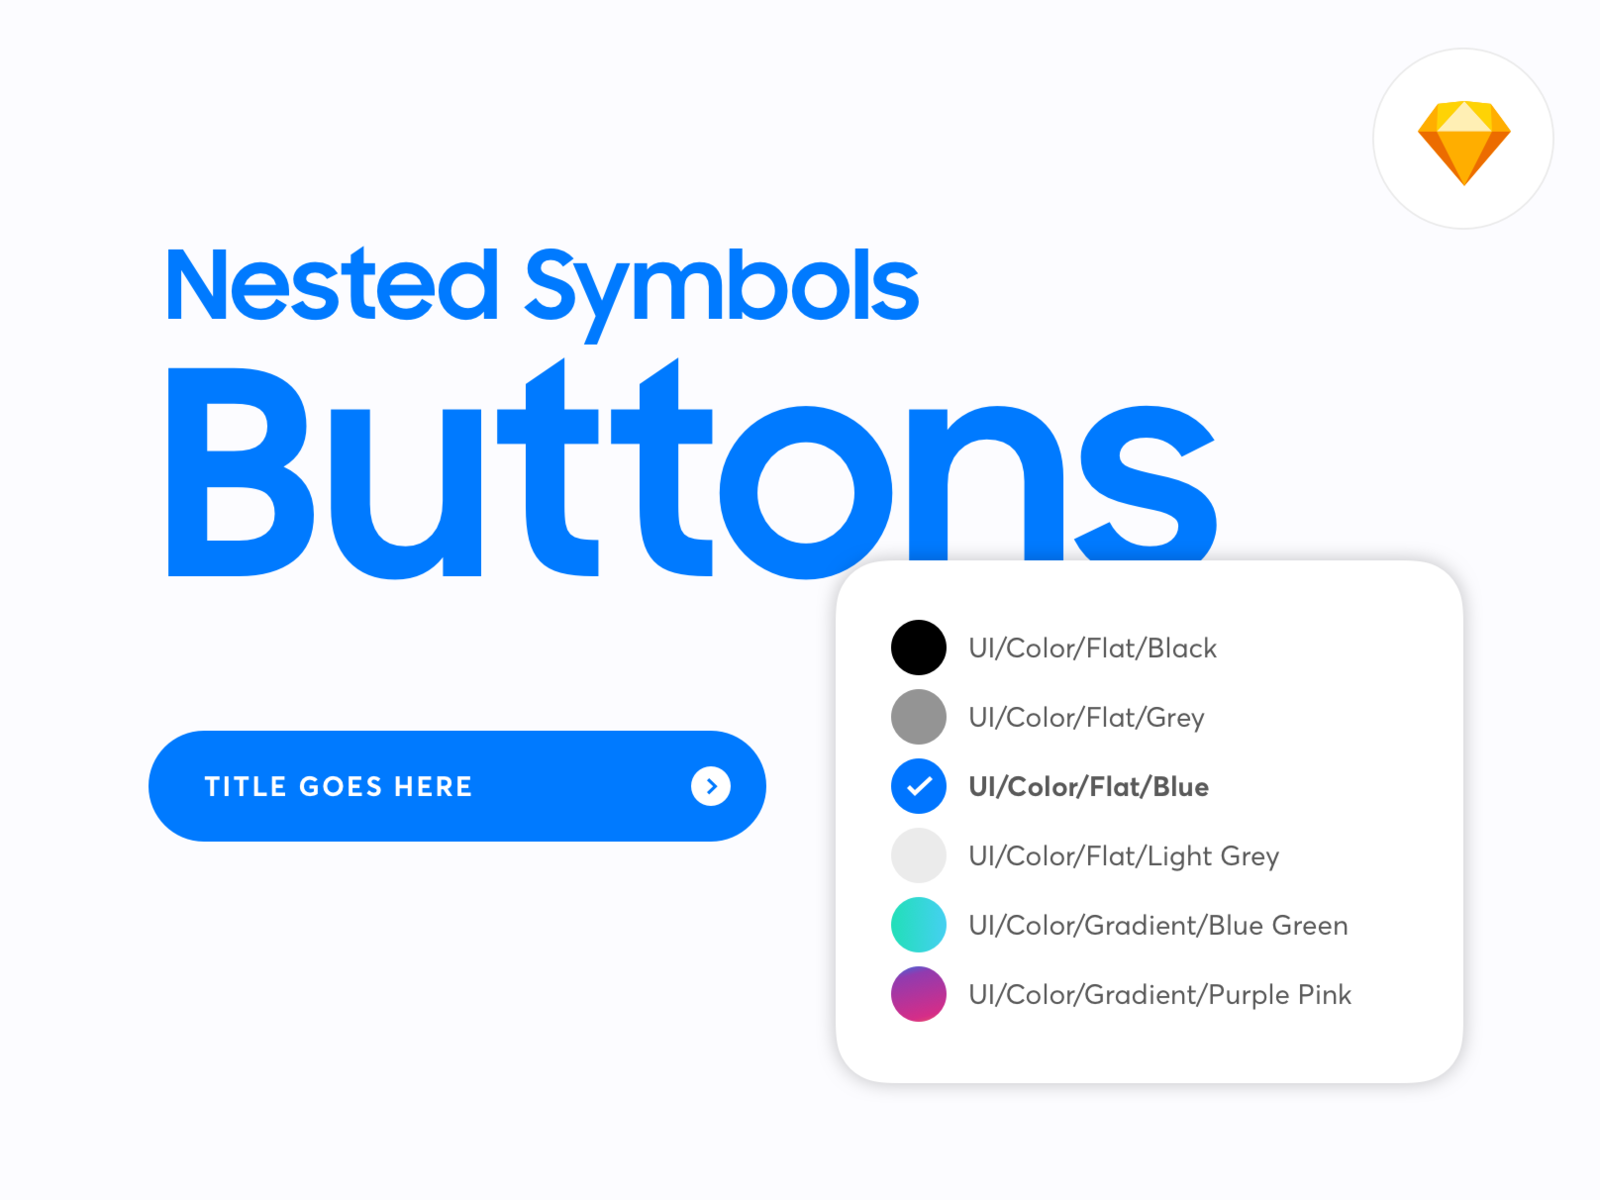 How to Create Nested Symbols in Sketch - UI/UX Assets